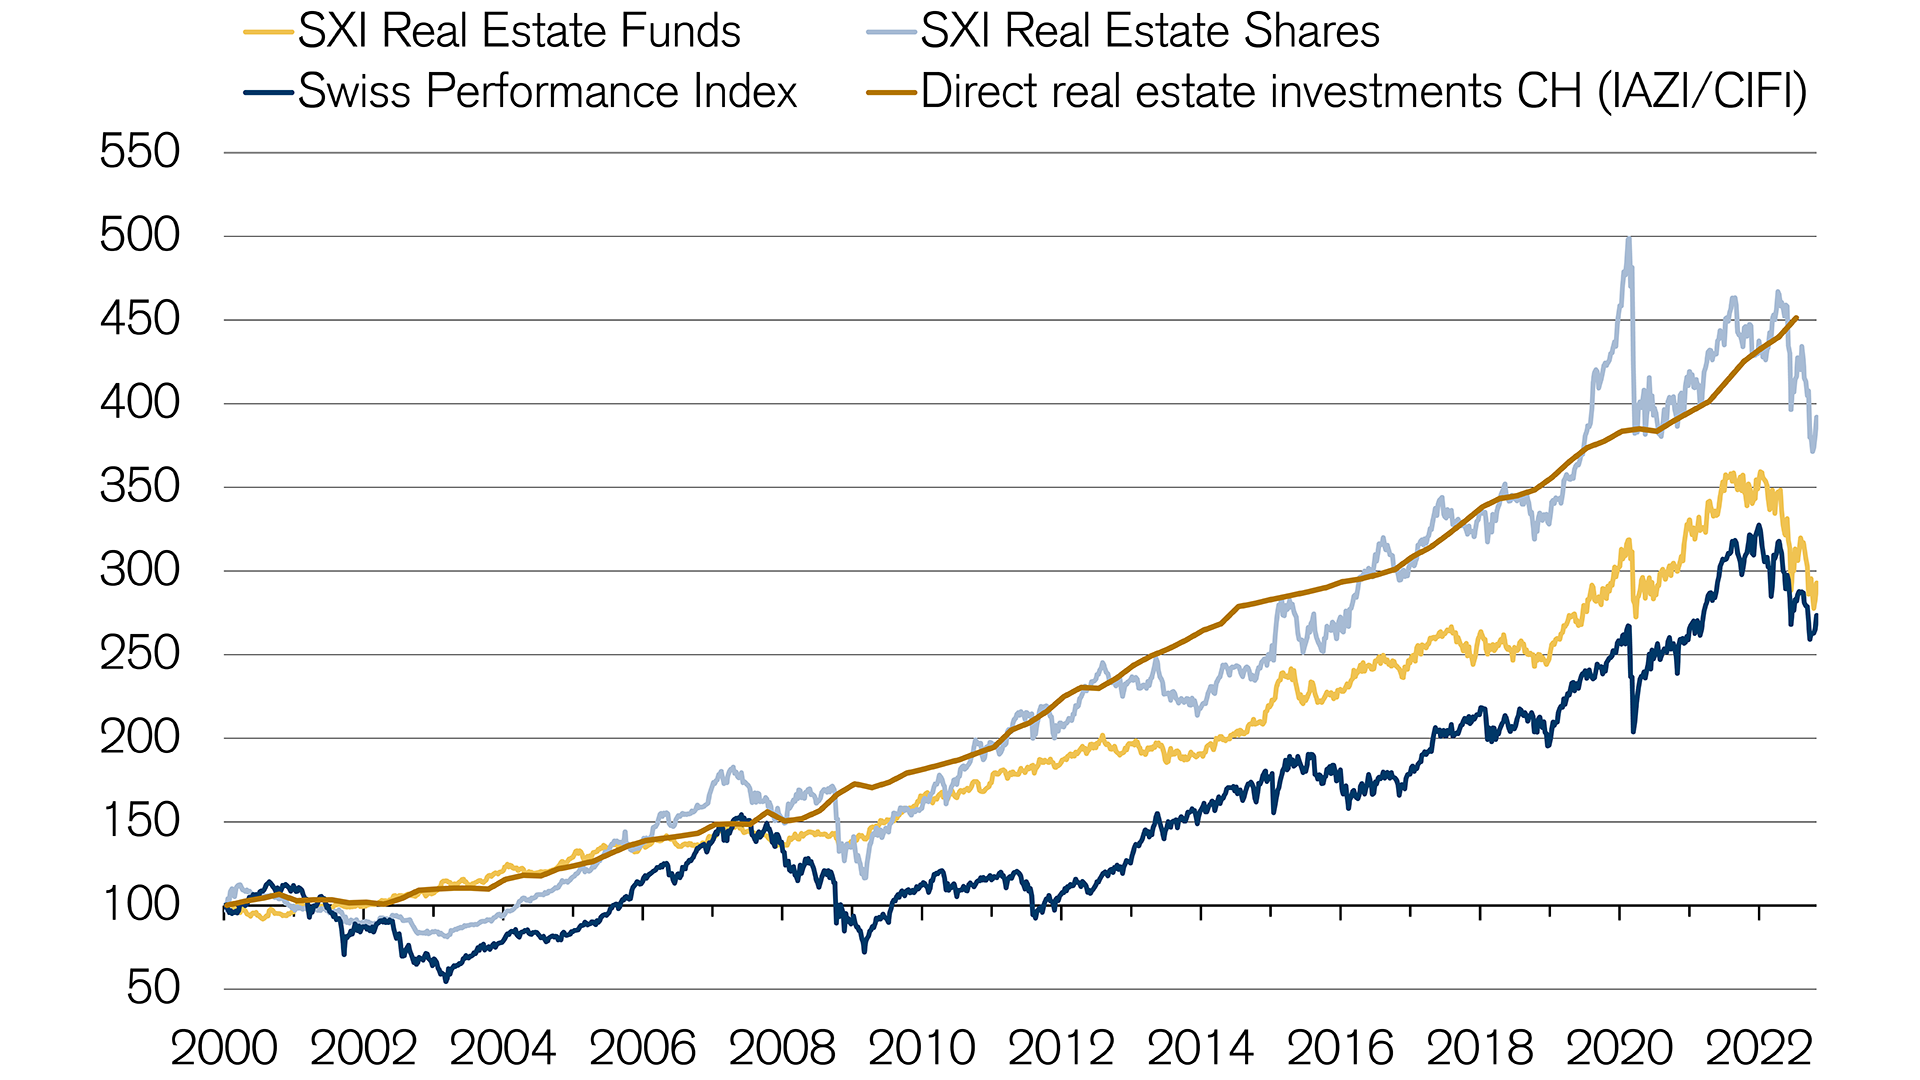 Comparison: Returns on real estate investments in Switzerland